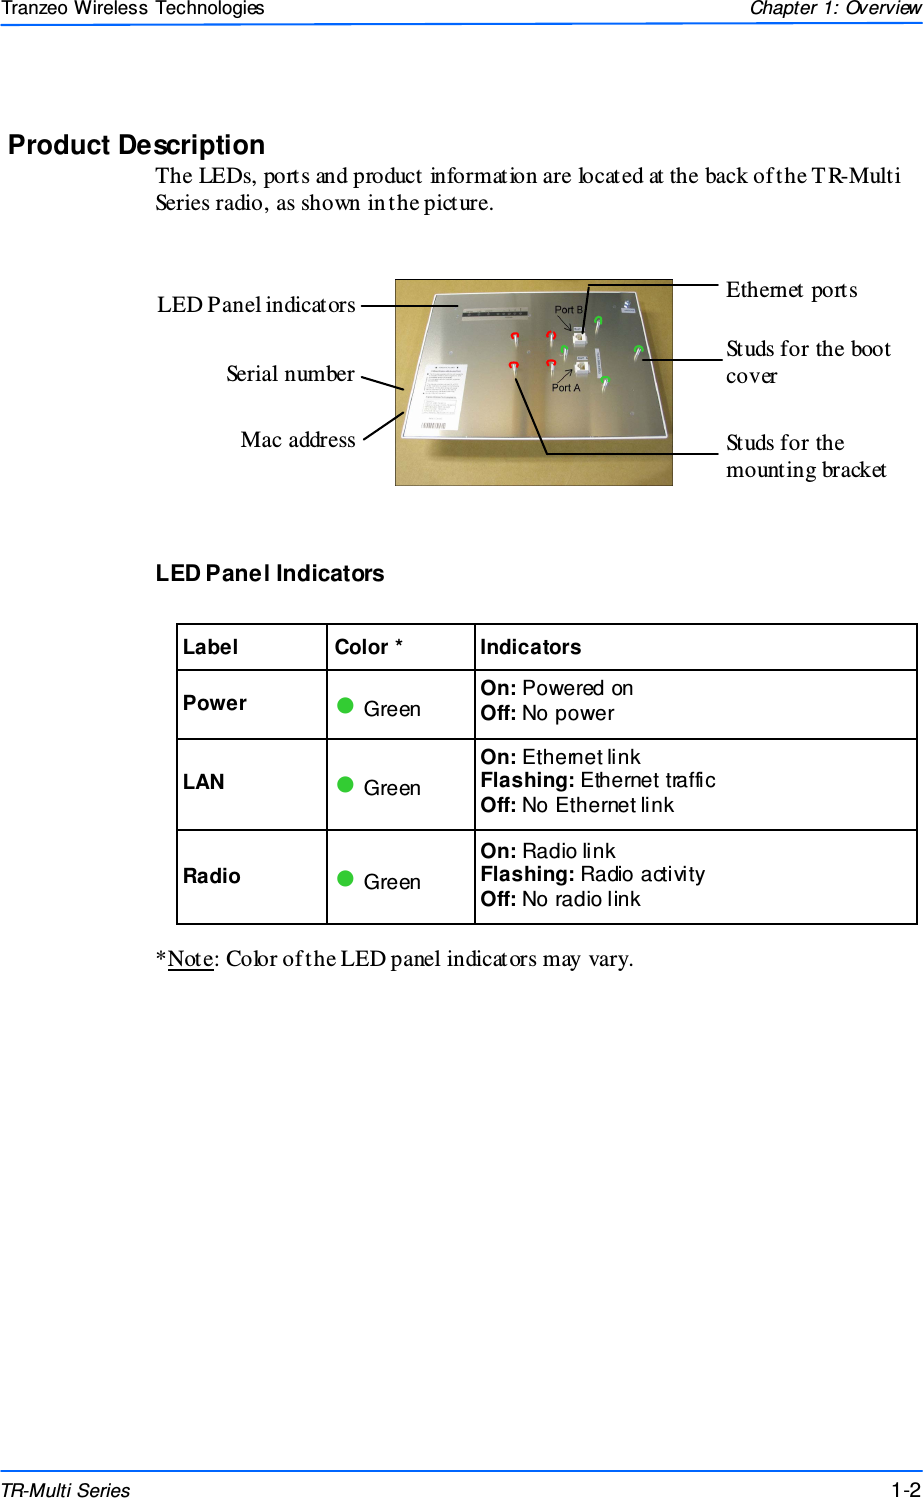  222 This document is intended for Public Distributio n                         19473 Fraser Way, Pitt Meadows, B.C. Canada V3Y  2V4 Chapter 1: Overview 1-2 TR-Multi Series Tranzeo Wireless Technologies Product Description The LEDs, ports and product information are located at the back of the T R-Multi Series radio, as shown in the picture.              LED Panel Indicators      *Note: Color of the LED panel indicators may vary. Label  Color *  Indicators Power  ● Green On: Powered on Off: No power LAN  ● Green On: Ethernet link Flashing: Ethernet traffic Off: No Ethernet link Radio  ● Green On: Radio link Flashing: Radio activity Off: No radio link LED Panel indicators Mac address  Ethernet ports Serial number Studs for the boot cover Studs for the mounting bracket  